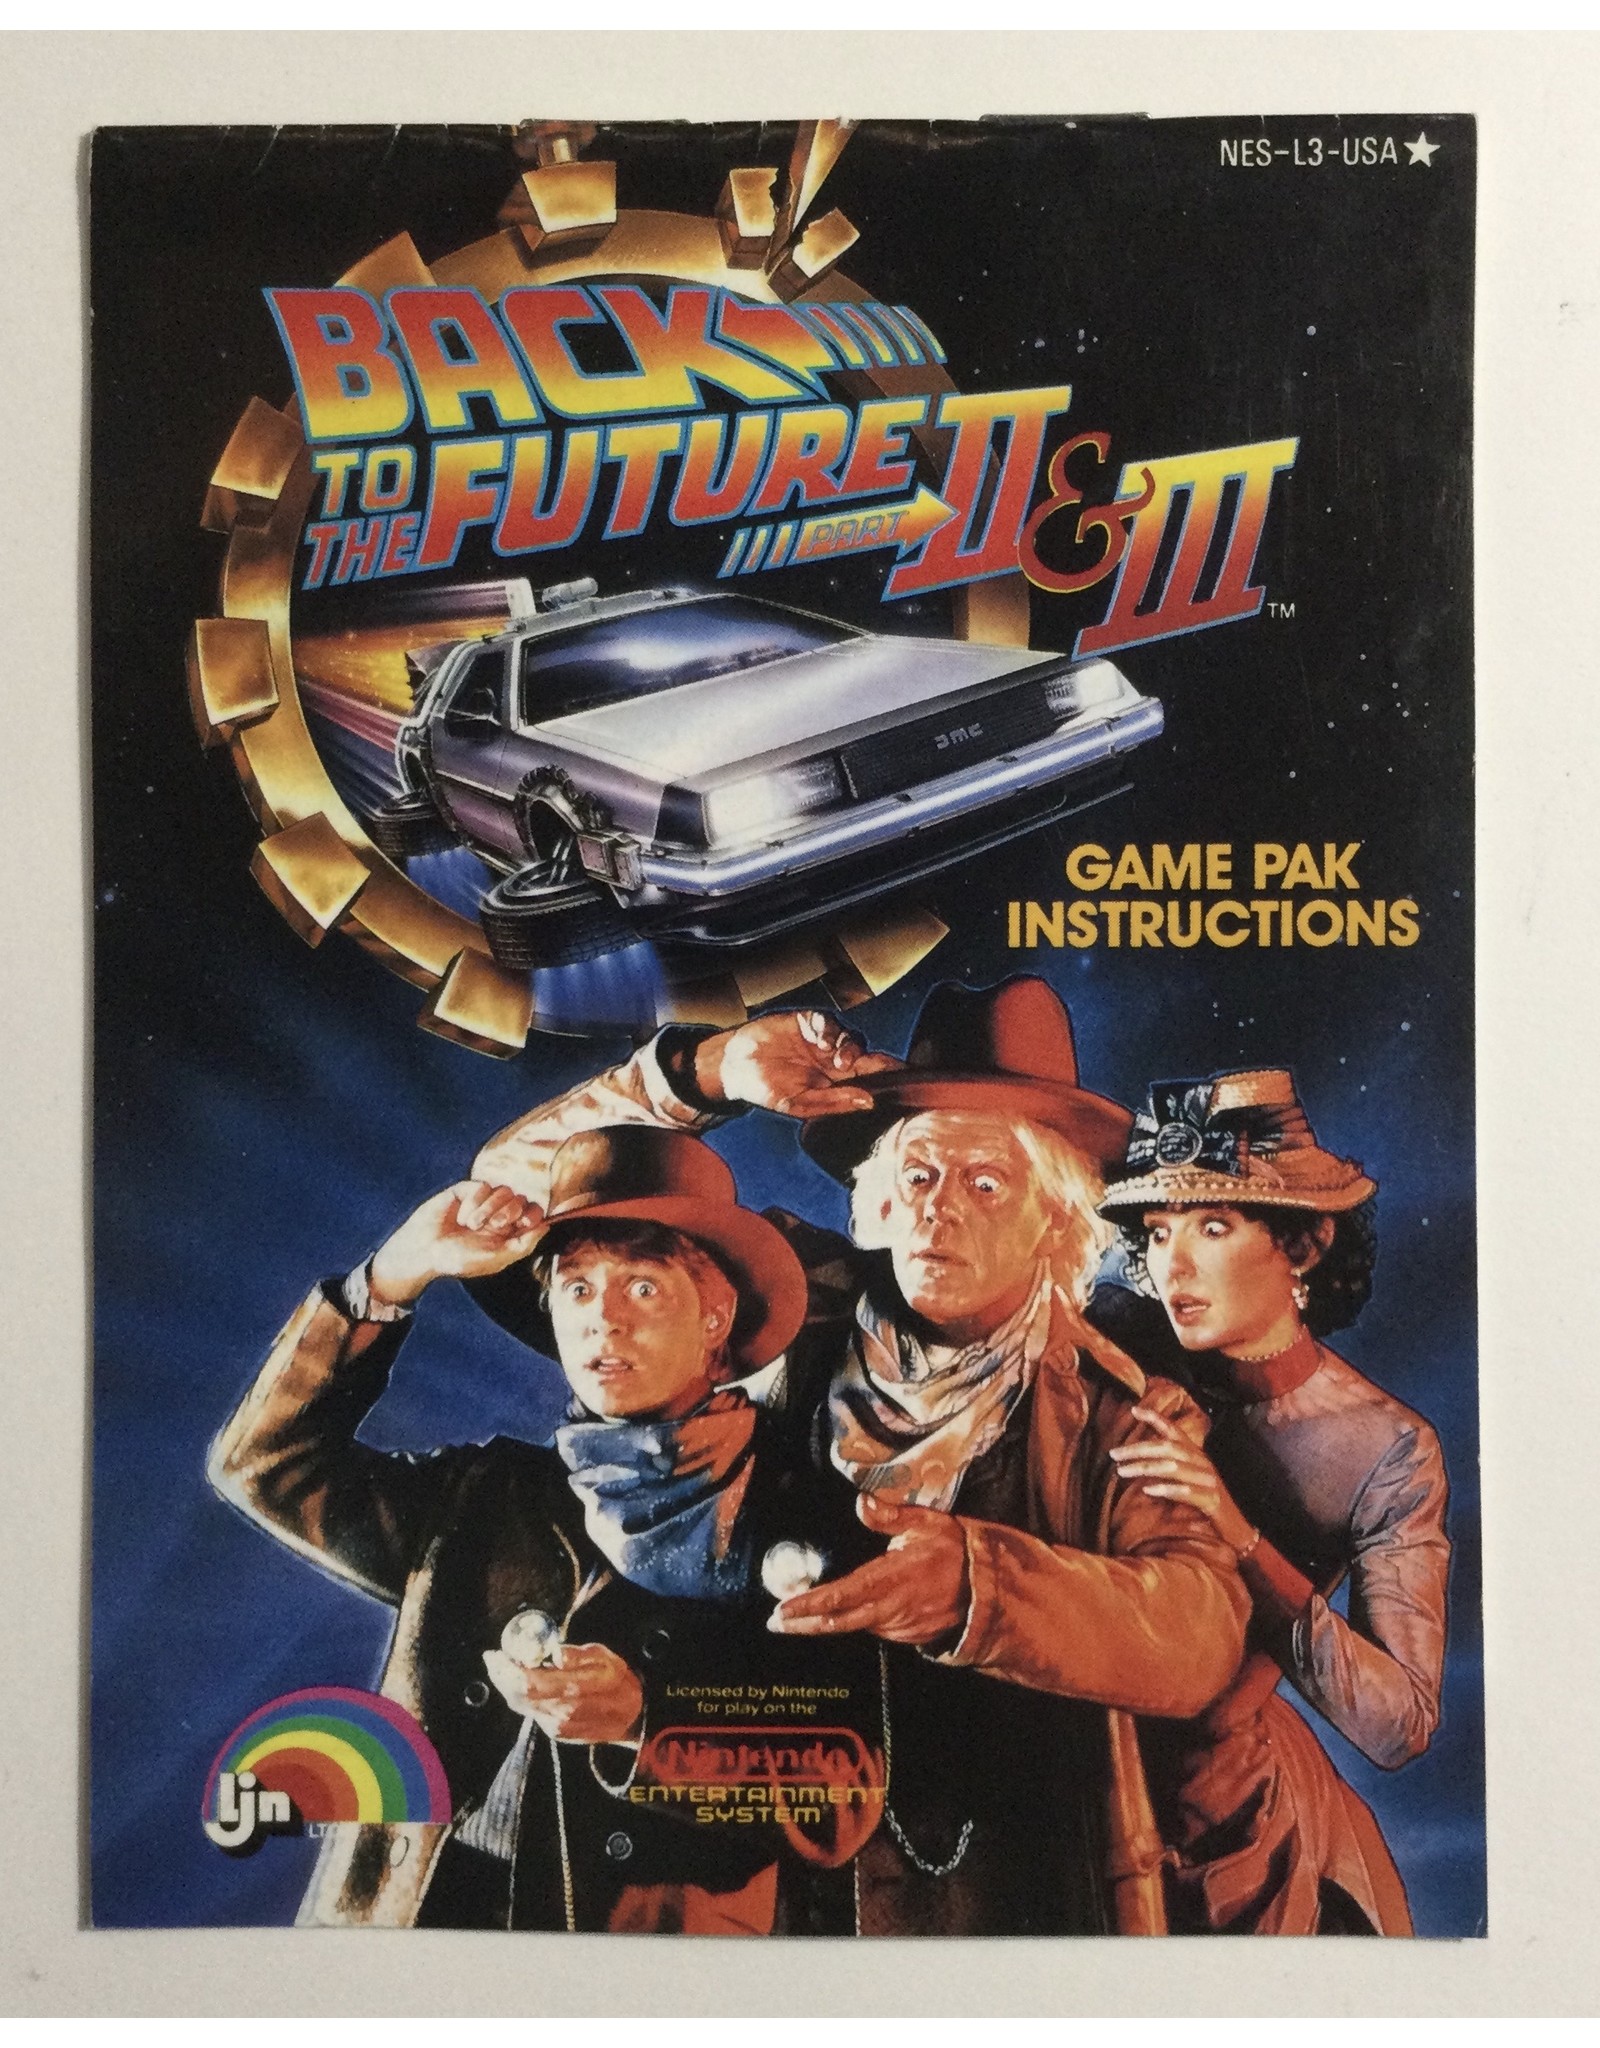 LJN Back to the Future Part II & III for Nintendo Entertainment system (NES)